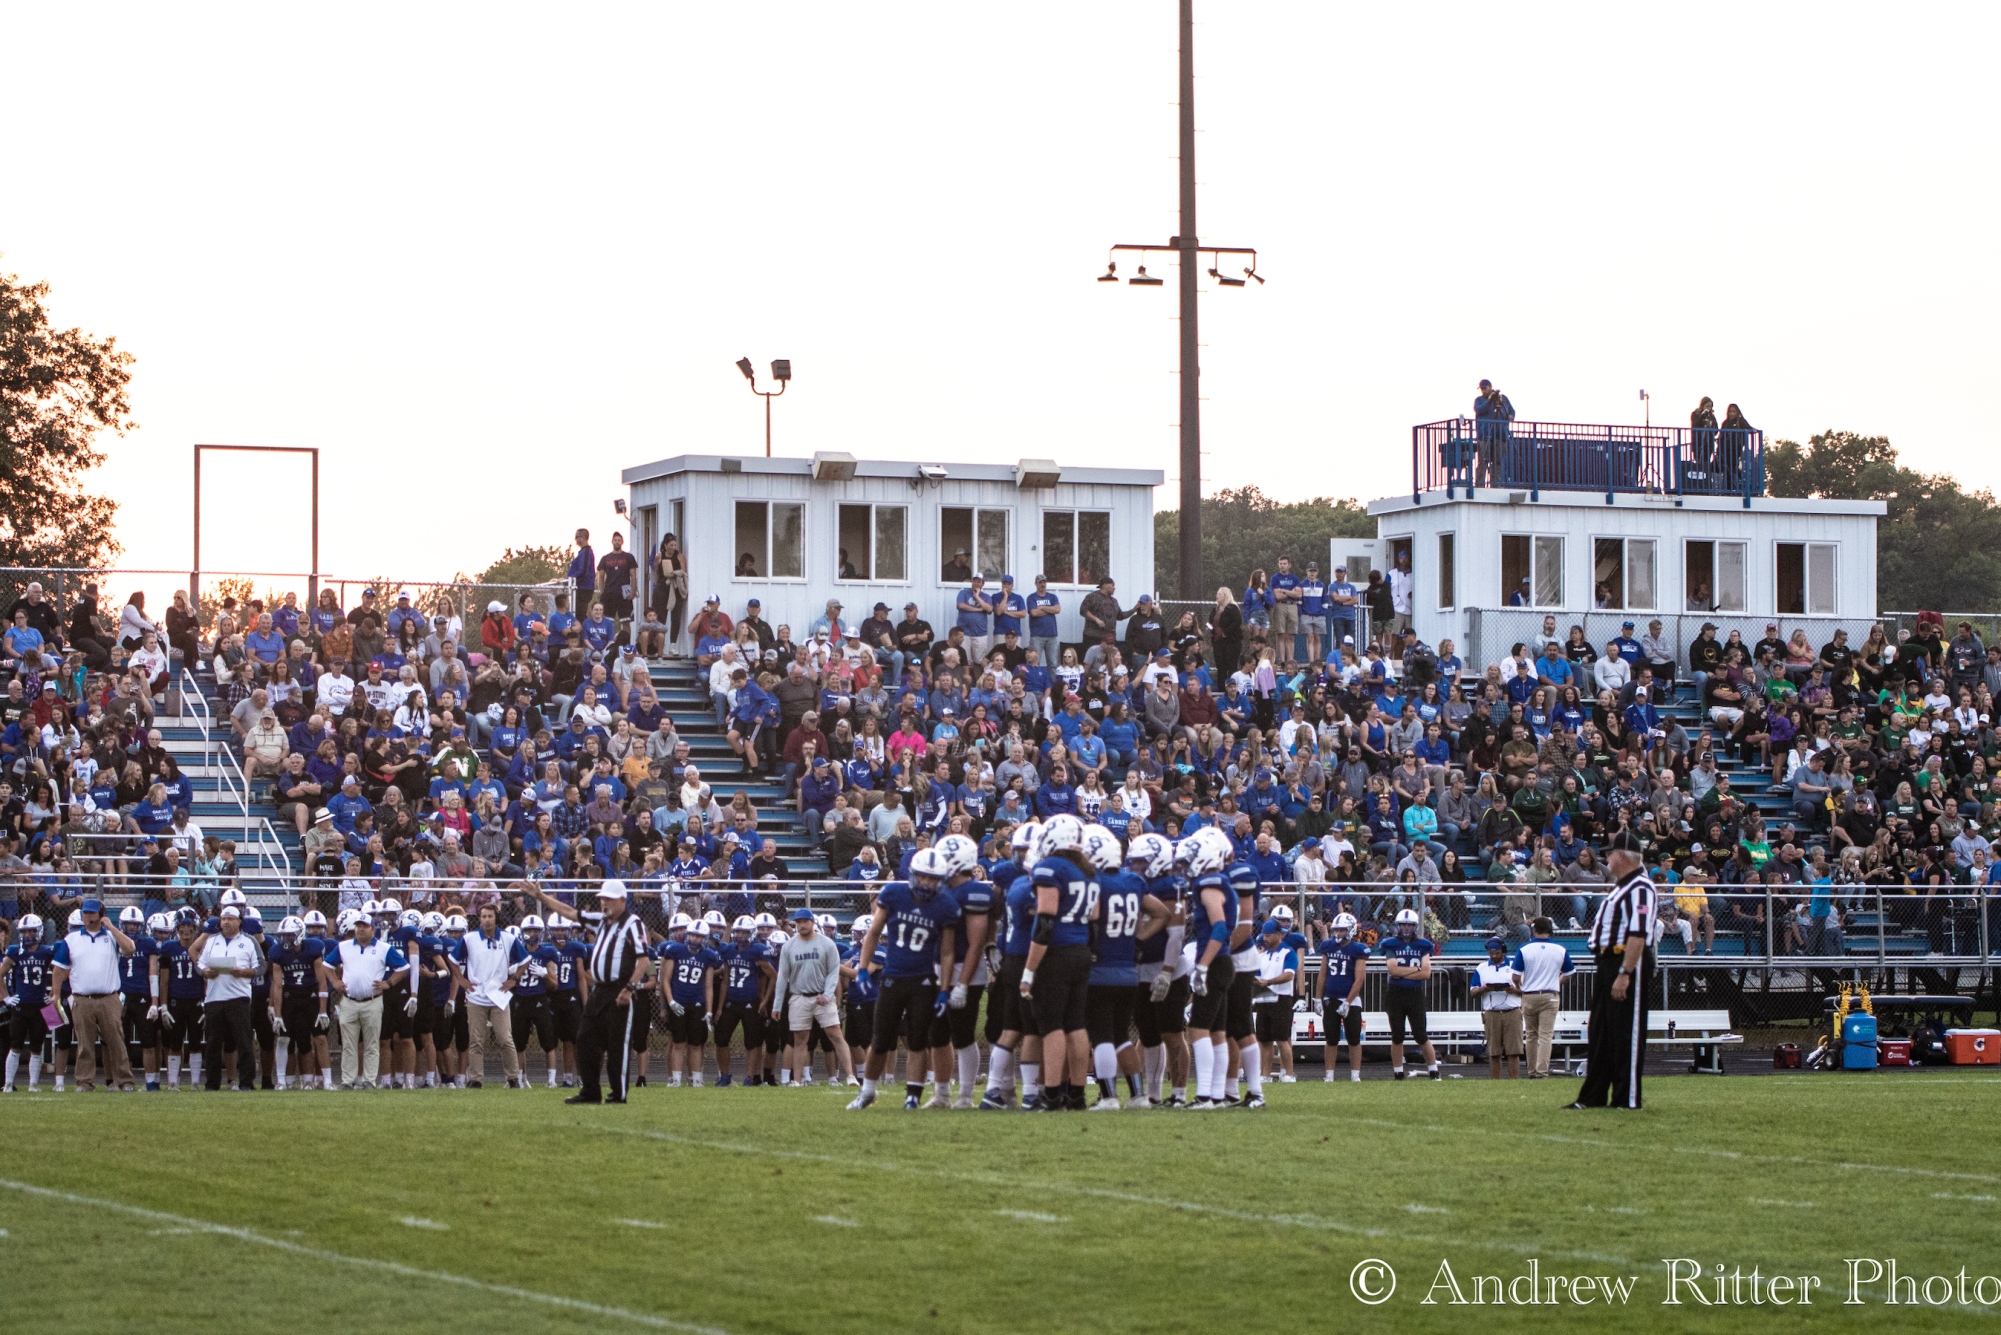 This years homecoming game drew a large crowd at Riverview Stadium.